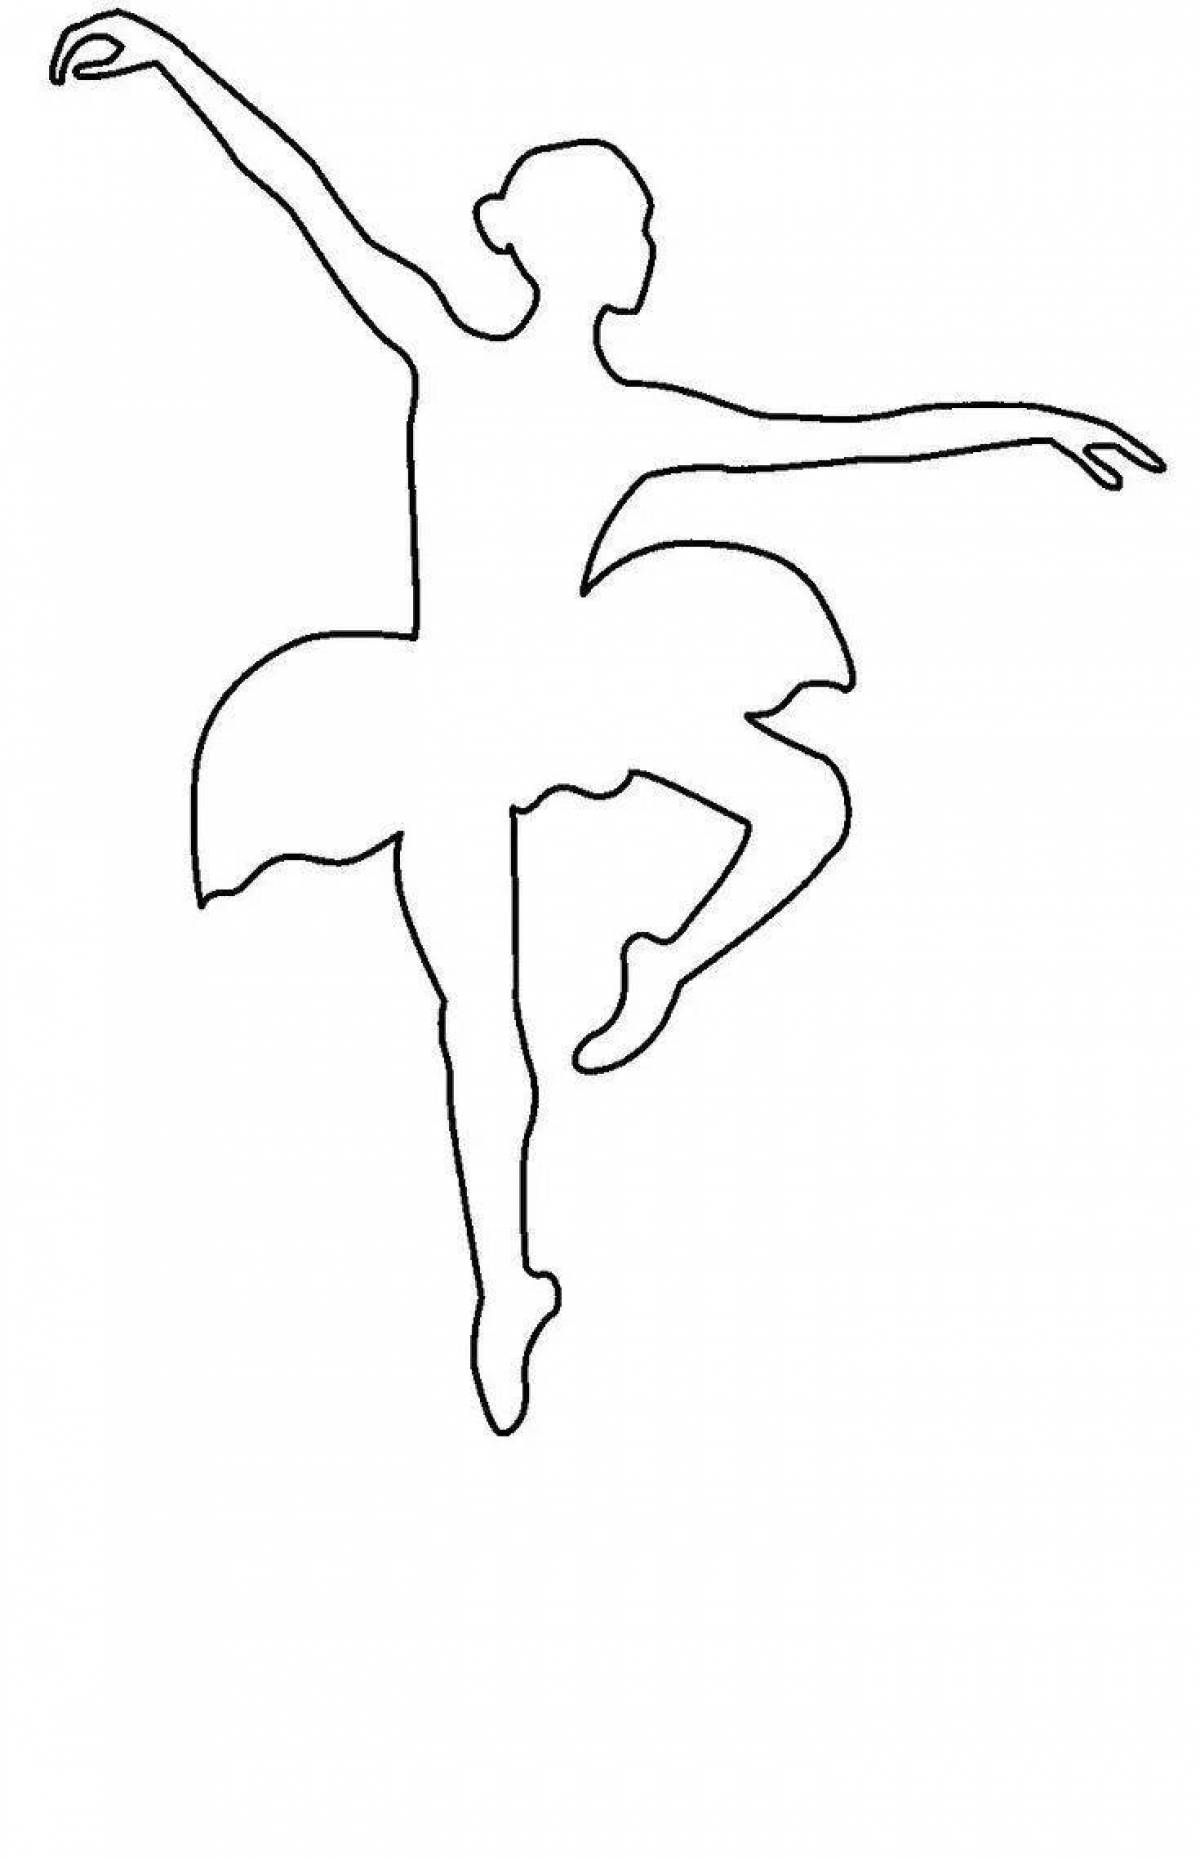 Coloring live silhouette of a ballerina